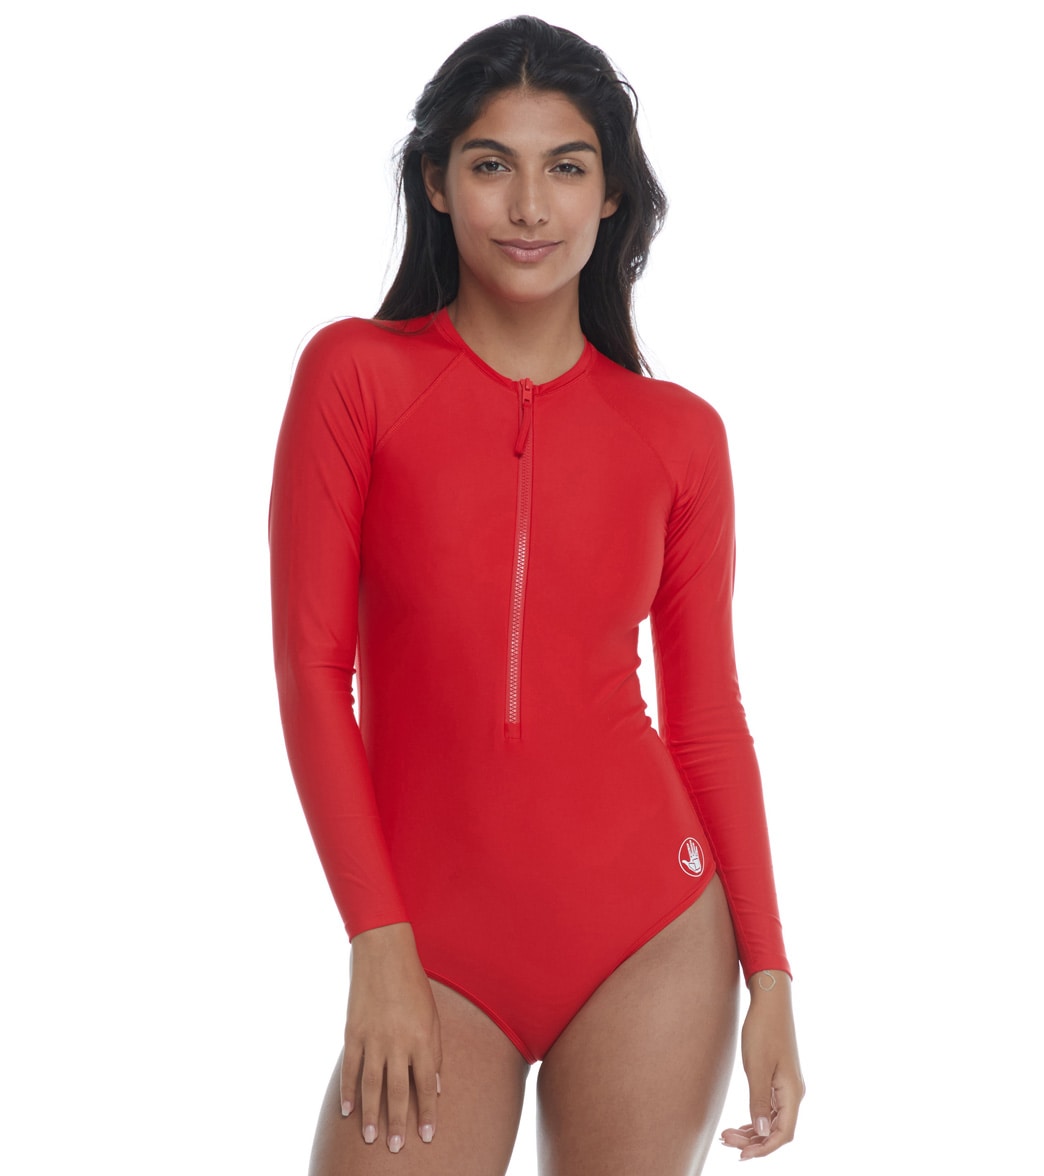 Body Glove Women's Smoothies Chanel Long Sleeve One Piece Swimsuit - True Small - Swimoutlet.com